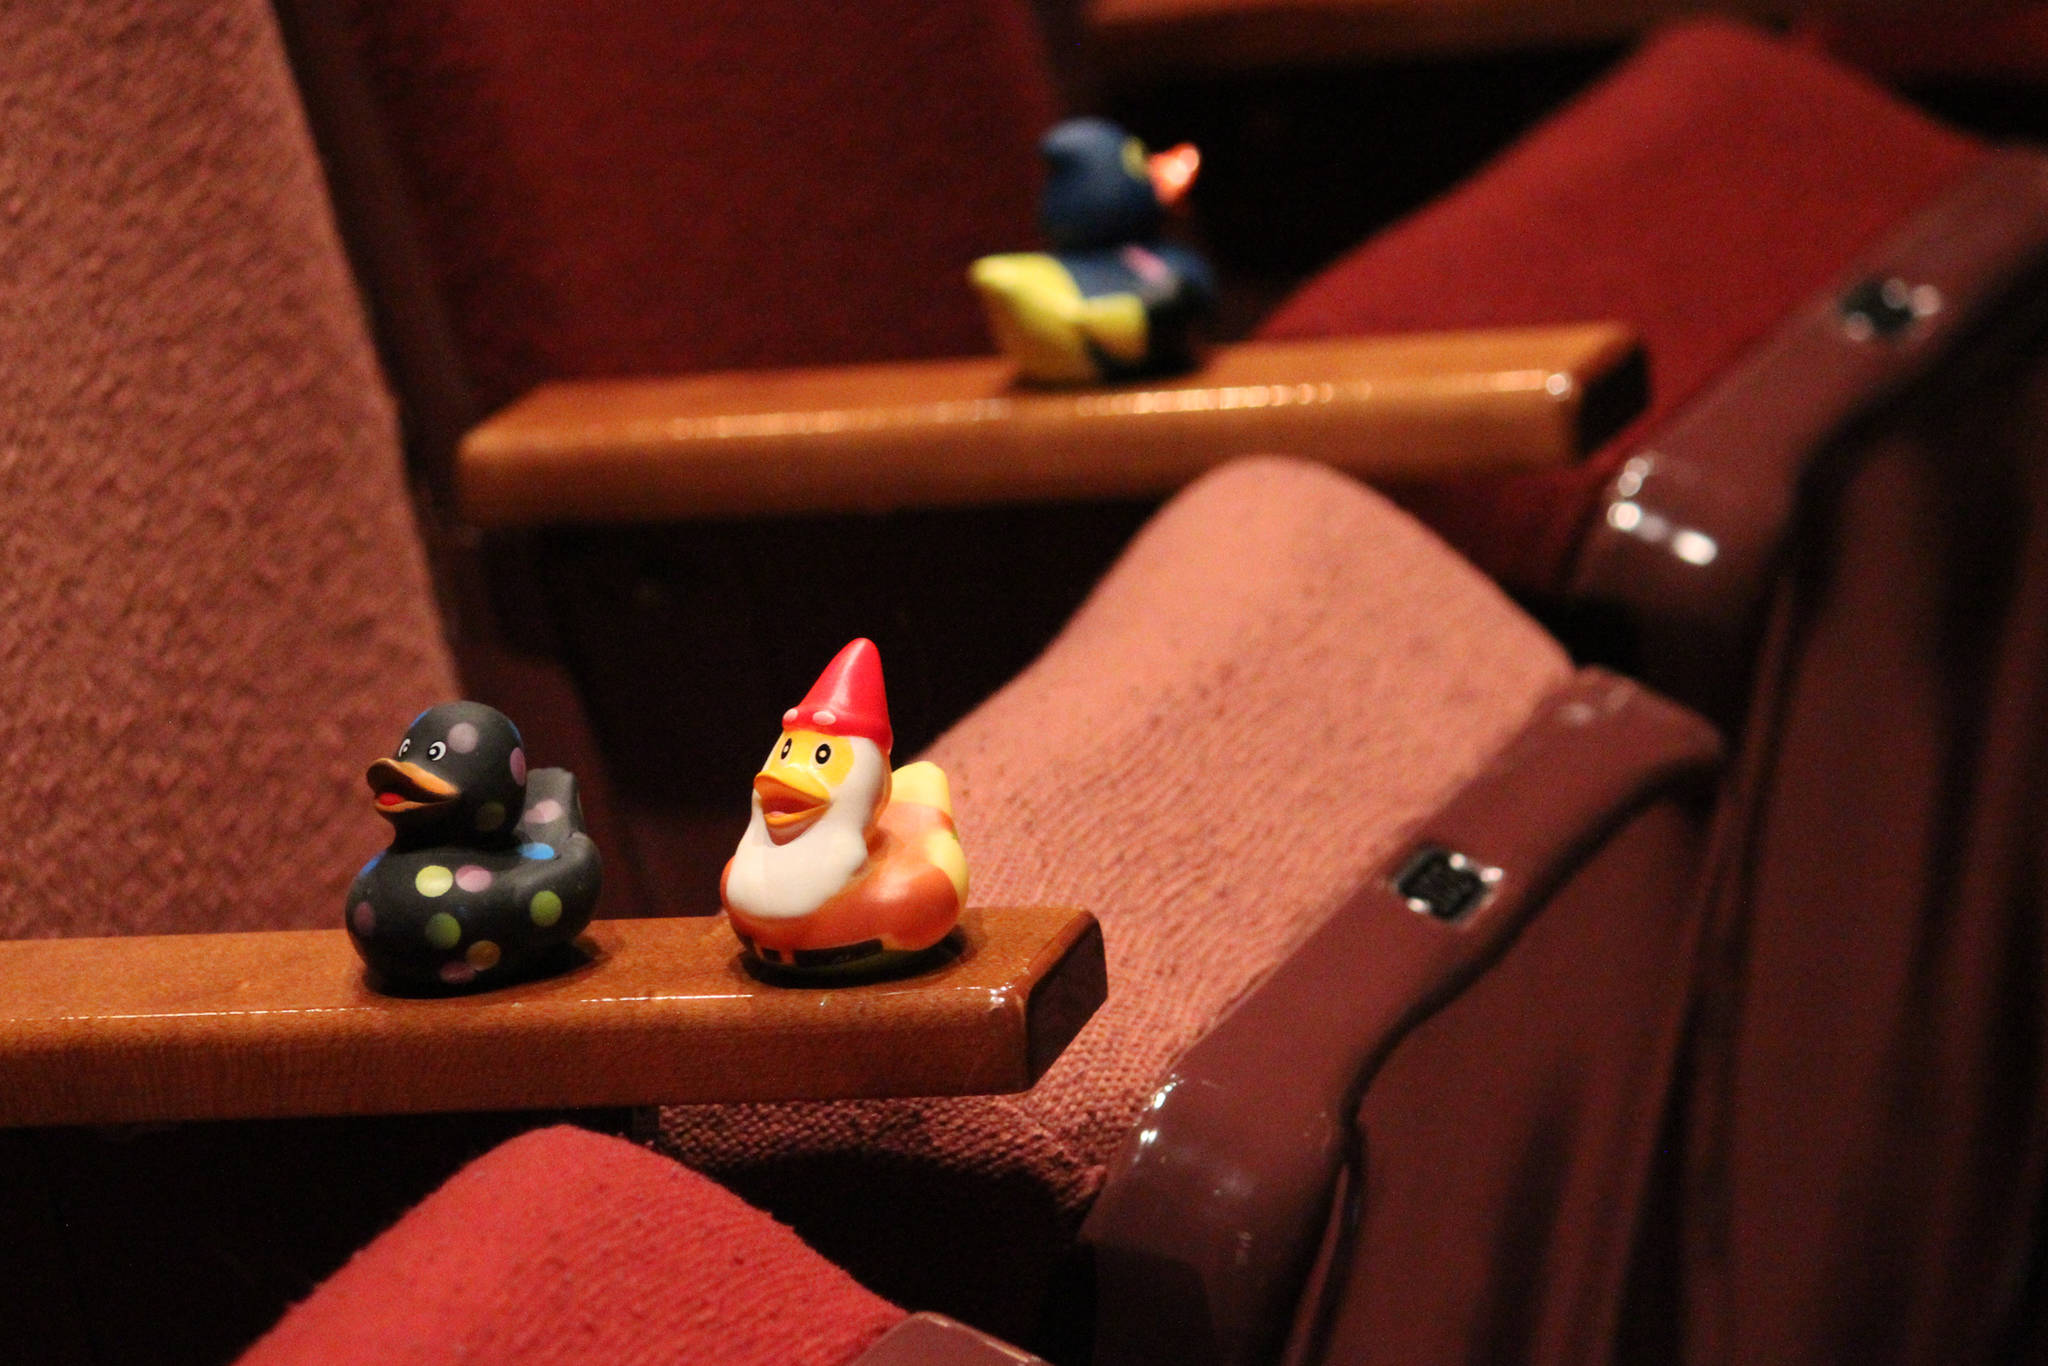 Rubber ducks adorn many of the seats in the Homer Mariner Theatre during a memorial for Gary Thomas on Sunday, Jan. 19, 2020 at Homer High School in Homer, Alaska. Thomas, a community volunteer and volunteer firefighter for more than 40 years, had an affinity for ducks. (Photo by Megan Pacer/Homer News)